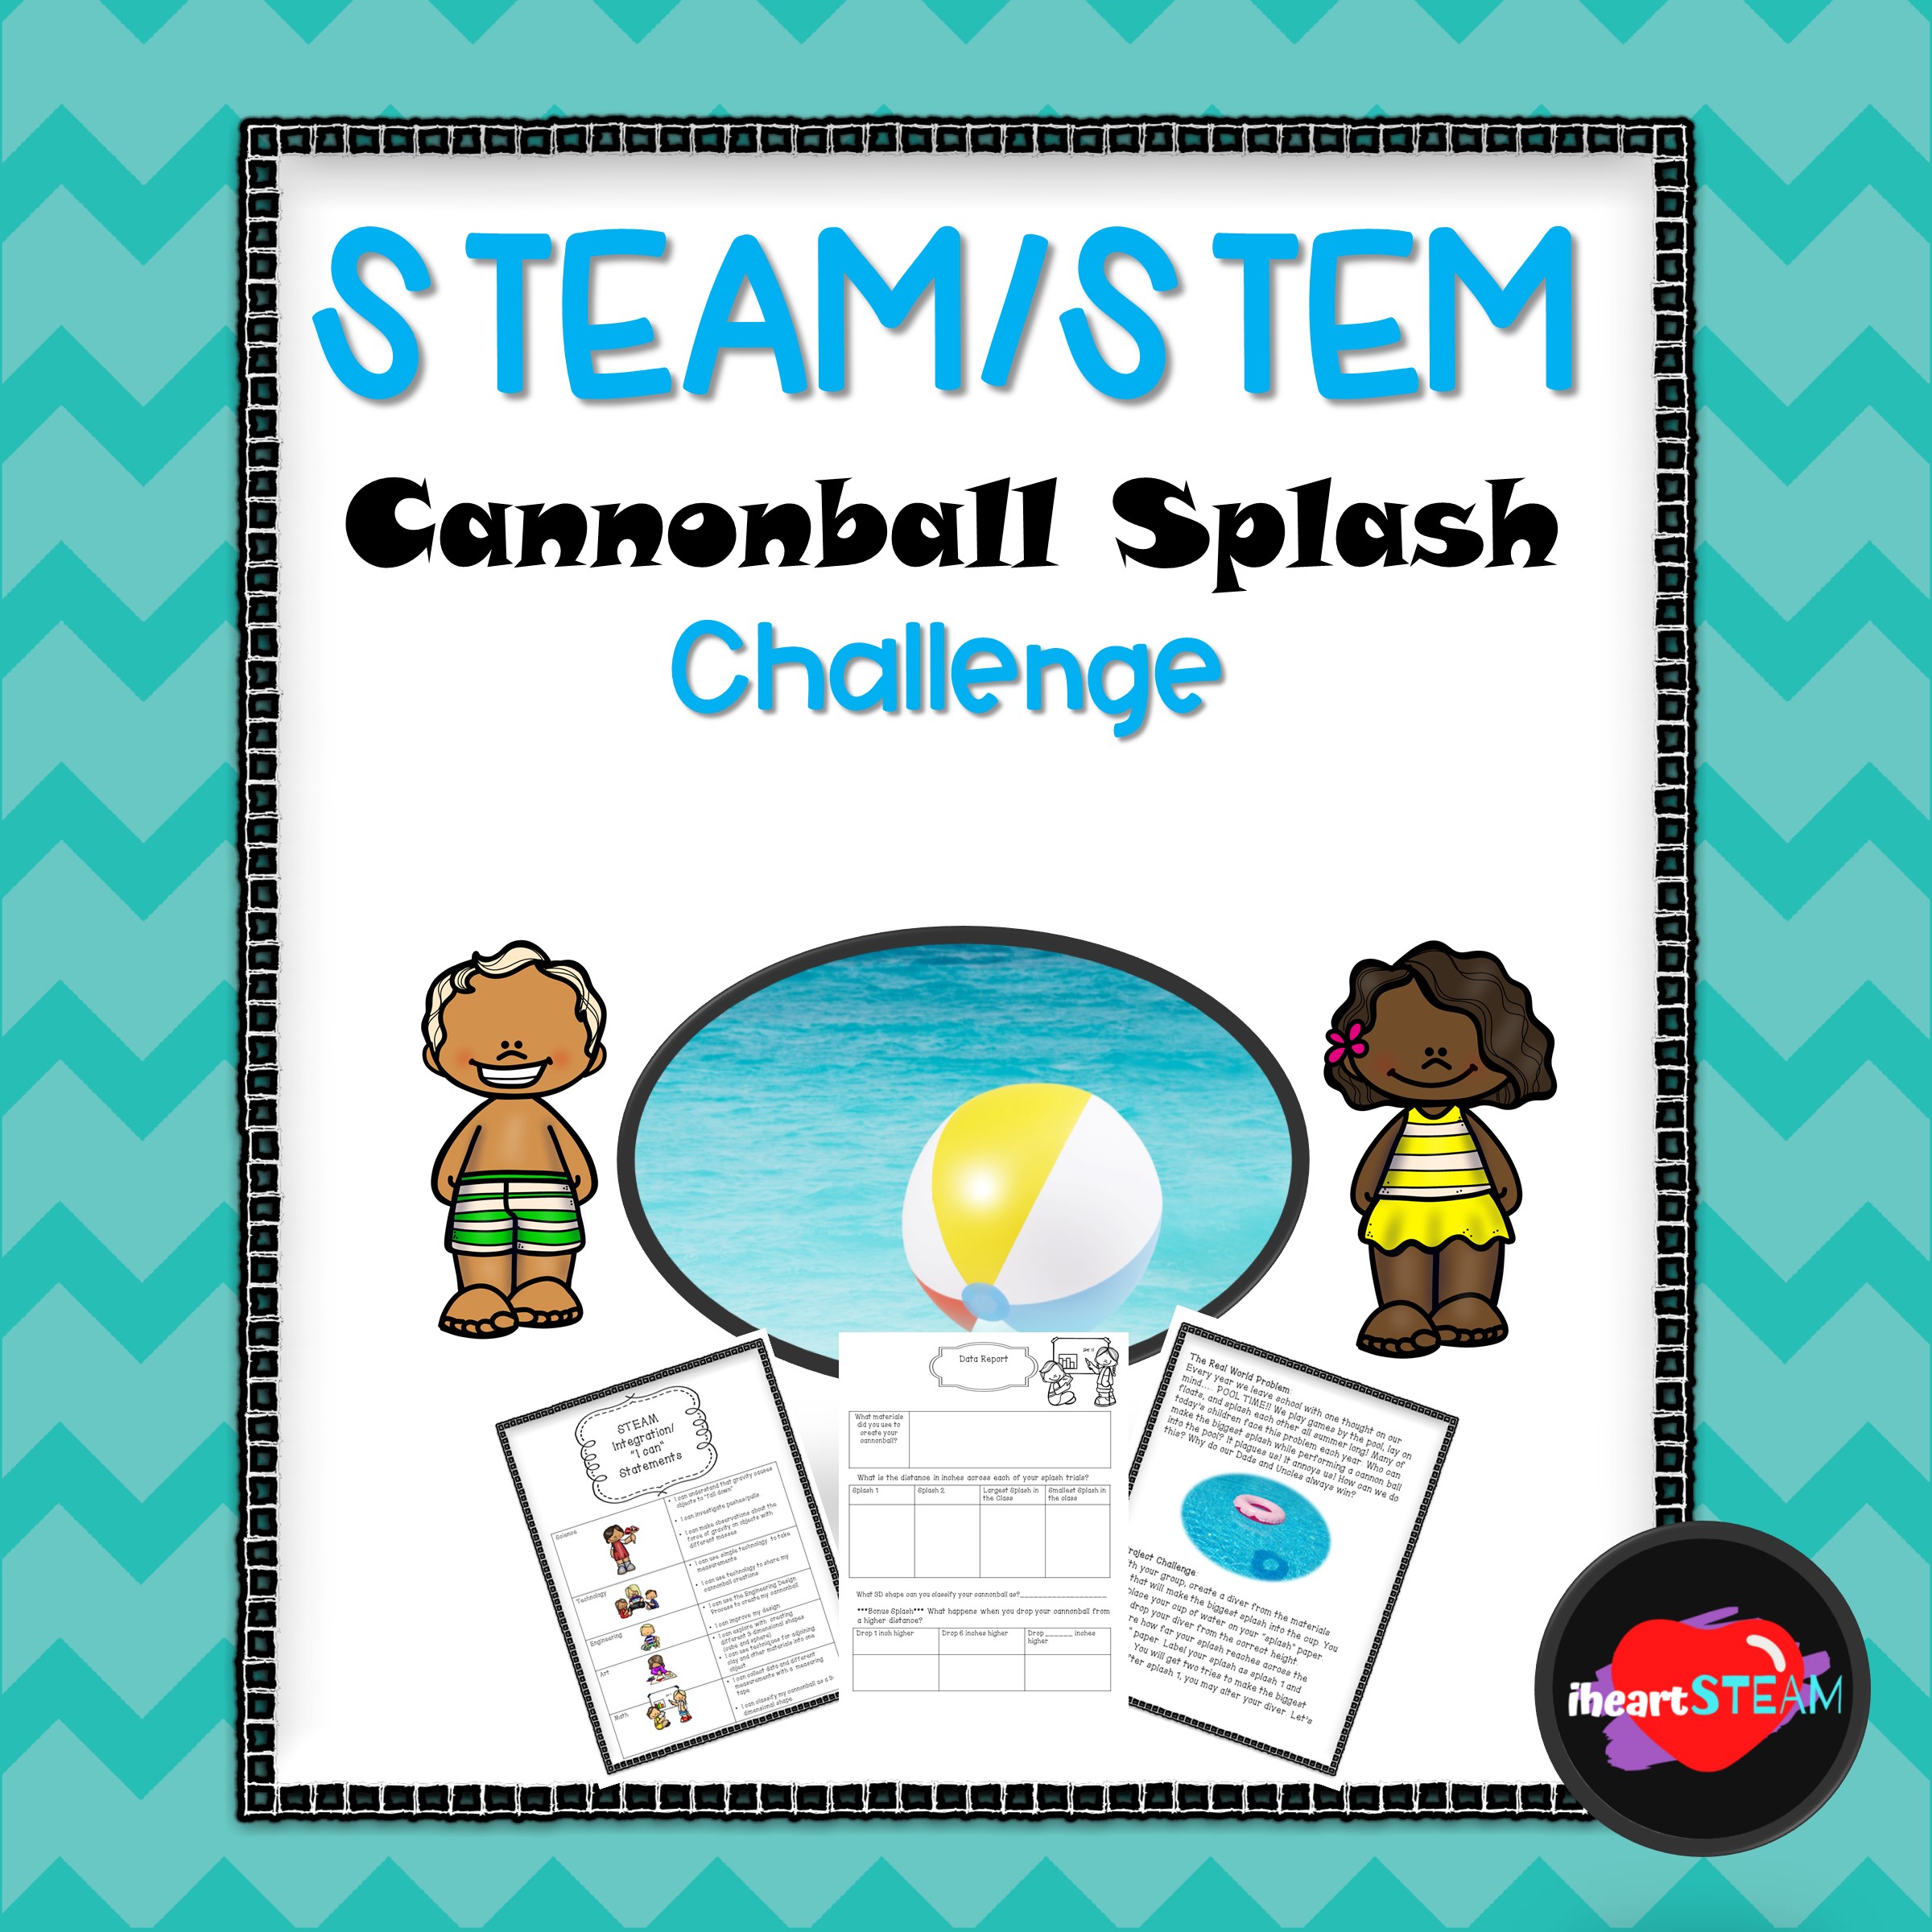 STEM Challenges for the Win!